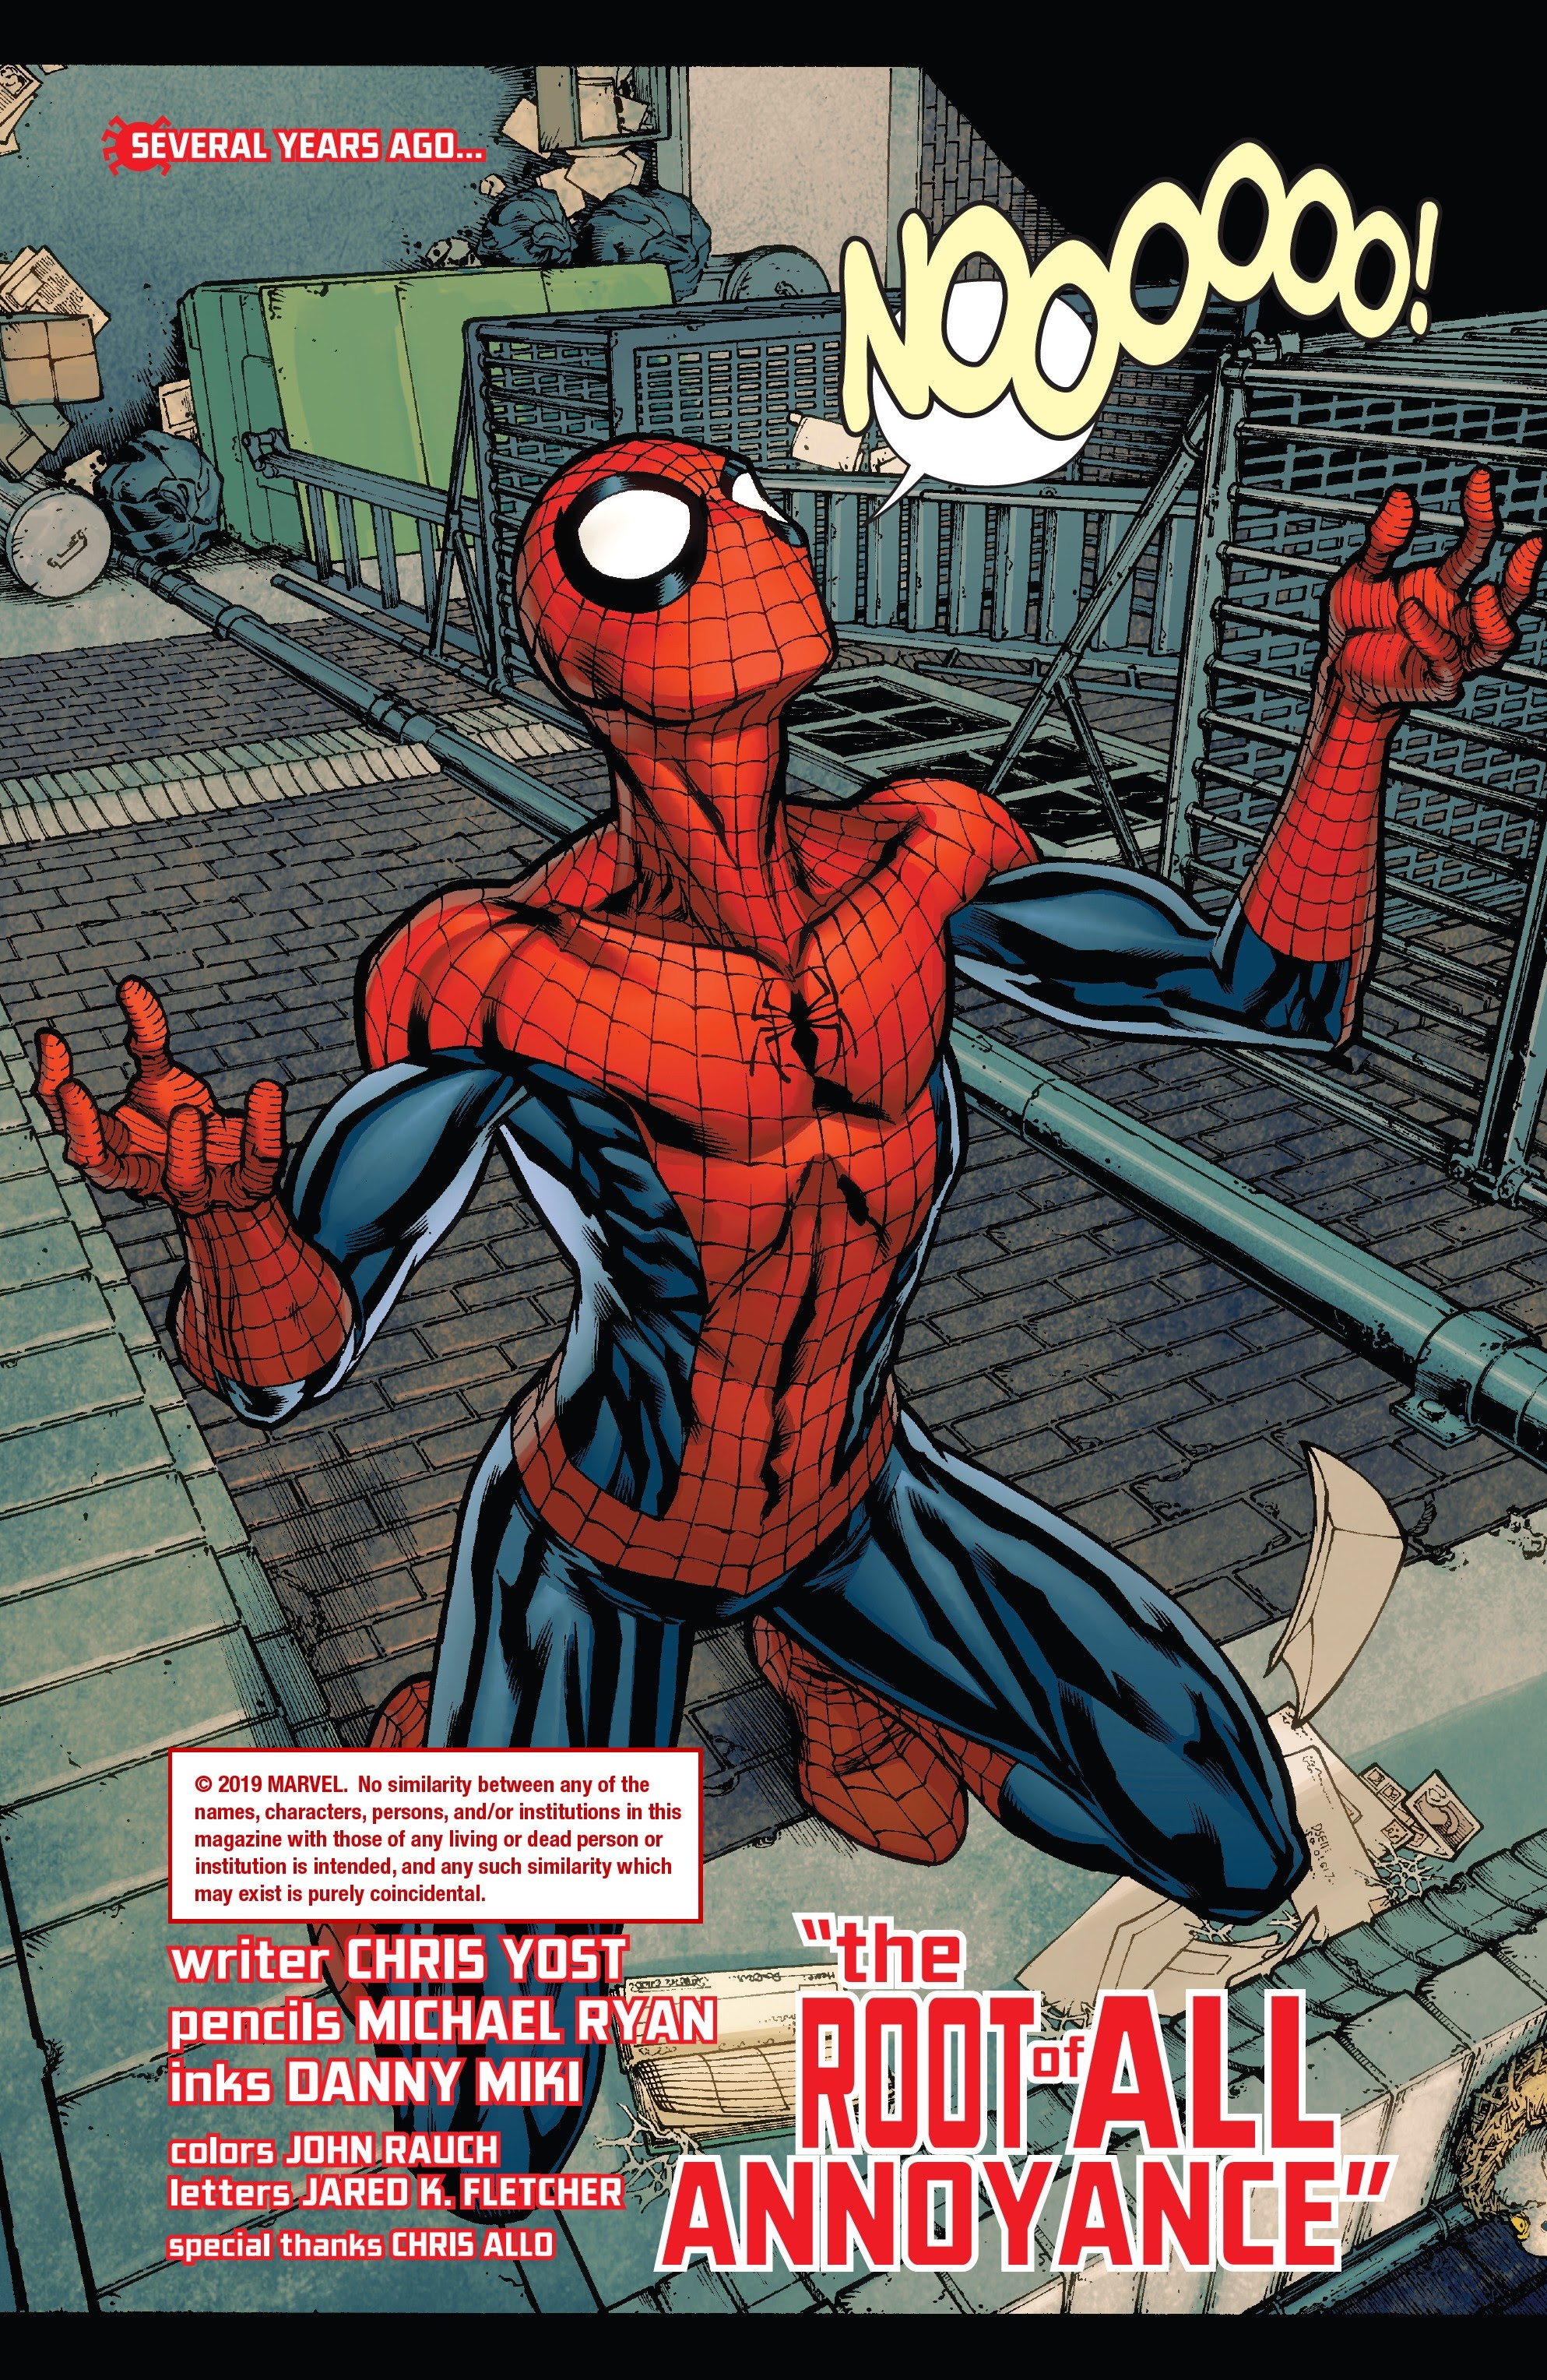 Read online Spider-Man: The Root of All Annoyance comic -  Issue # Full - 2